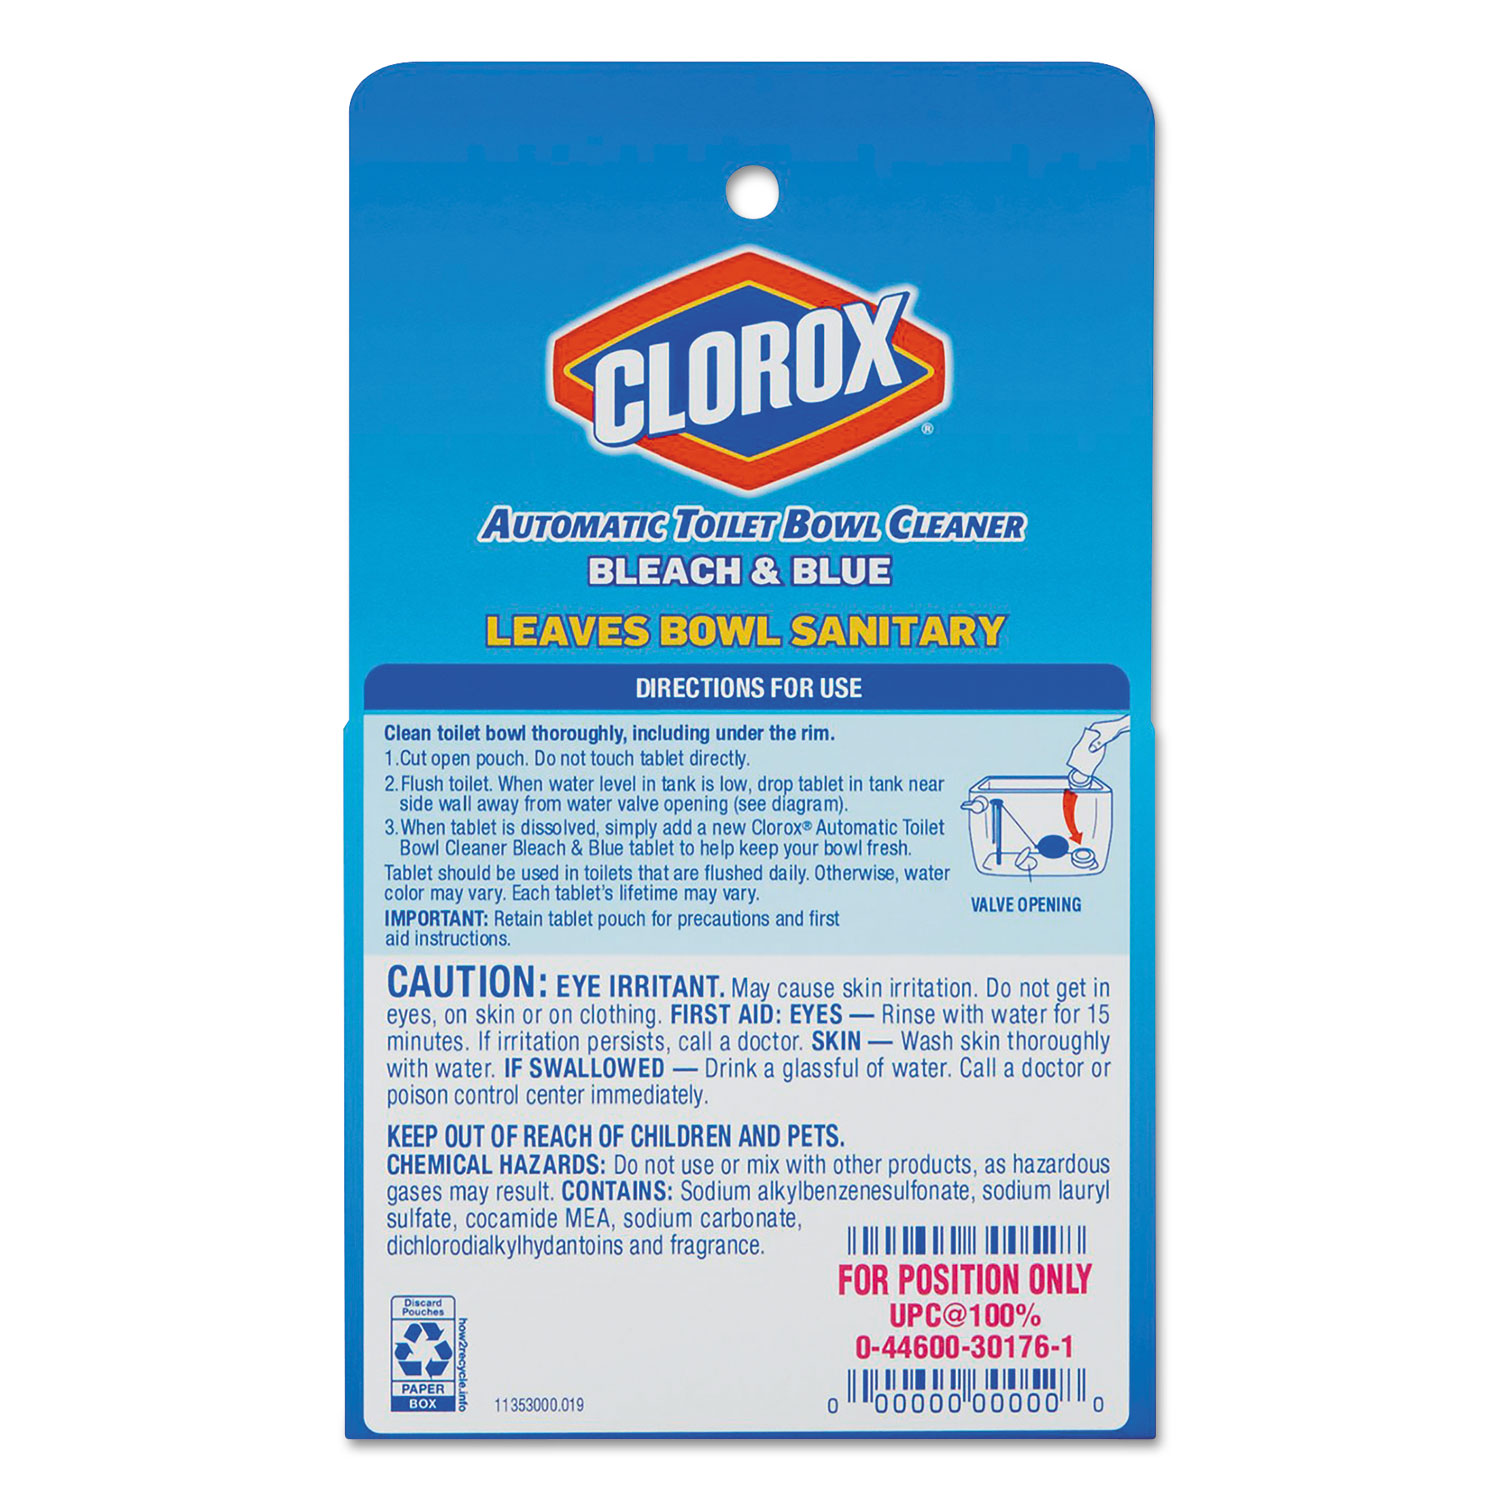 Bleach & Blue Automatic Toilet Bowl Cleaner by Clorox